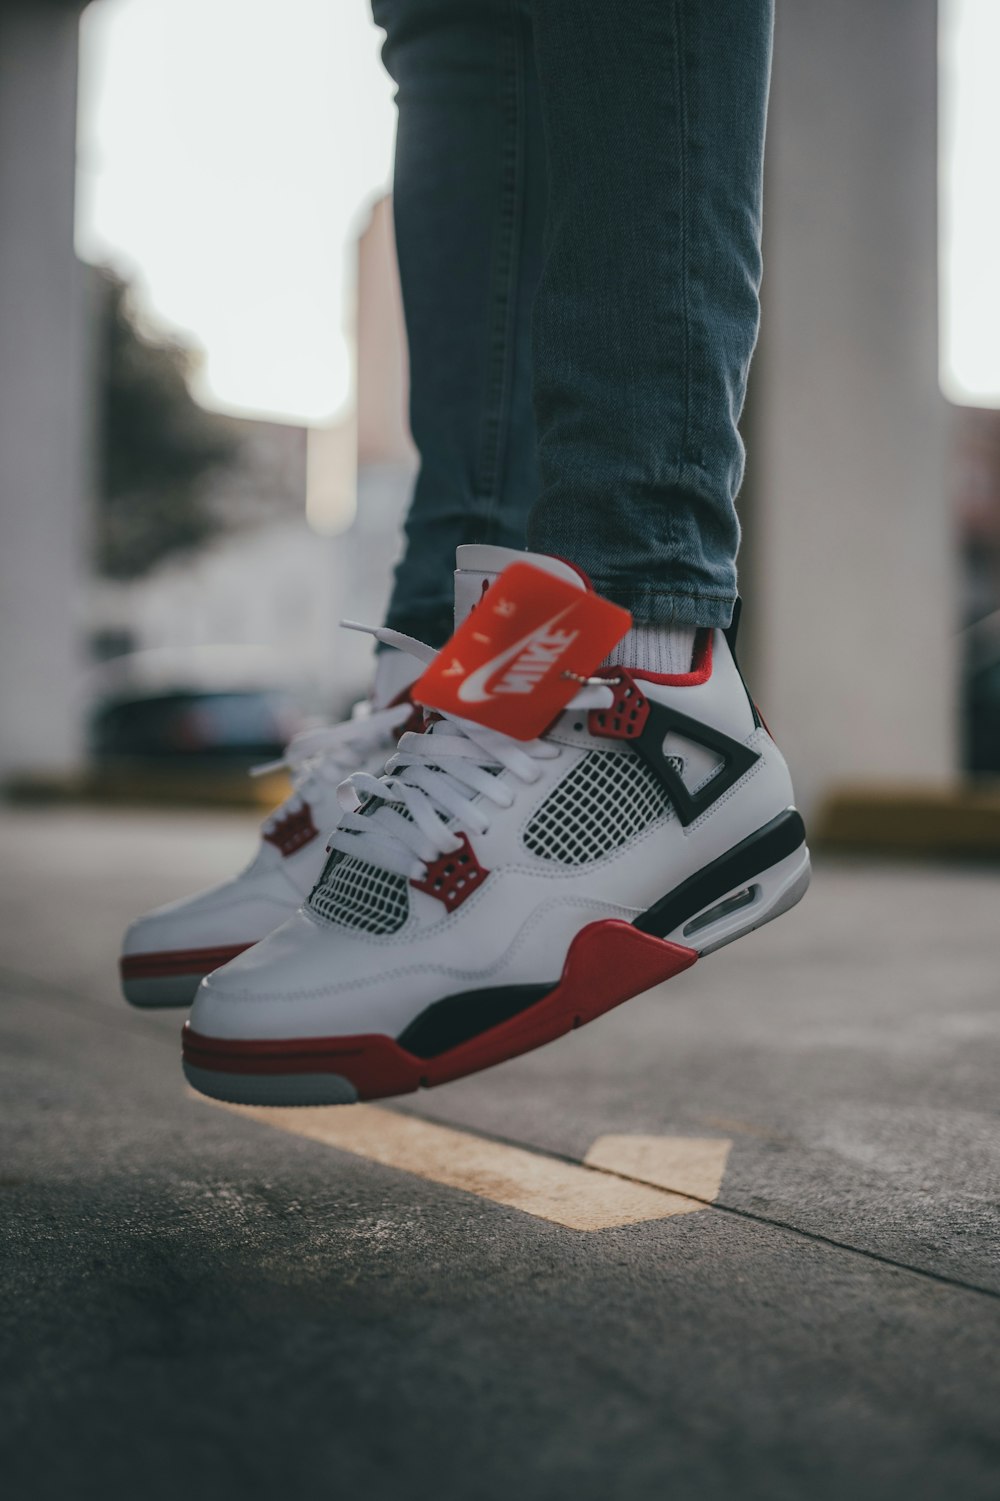 Person in blue denim jeans wearing red and white nike air max 90 photo –  Free Shoe Image on Unsplash